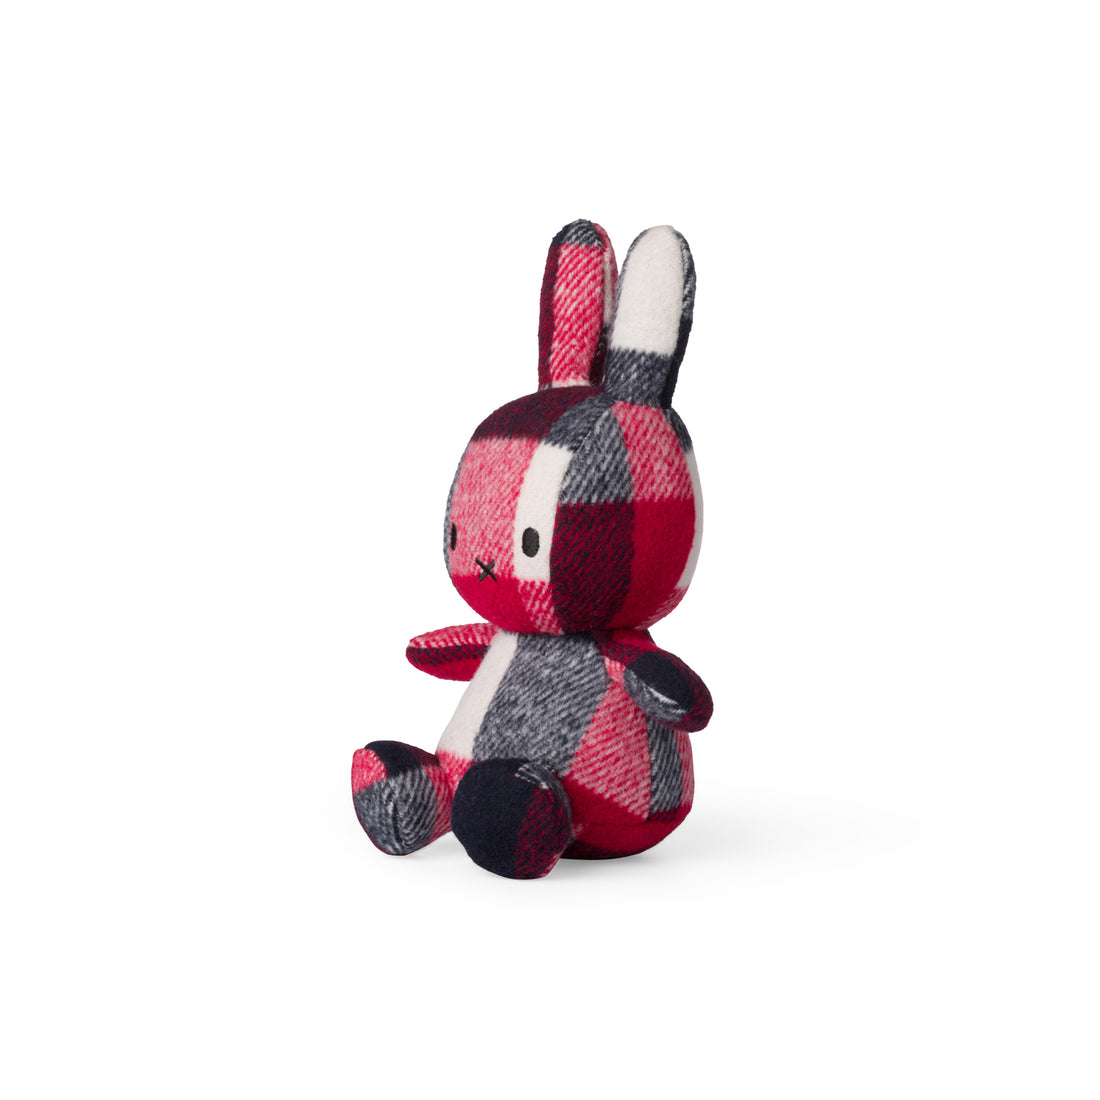 miffy-sitting-check-red-blue-23cm-miff-24182373- (2)